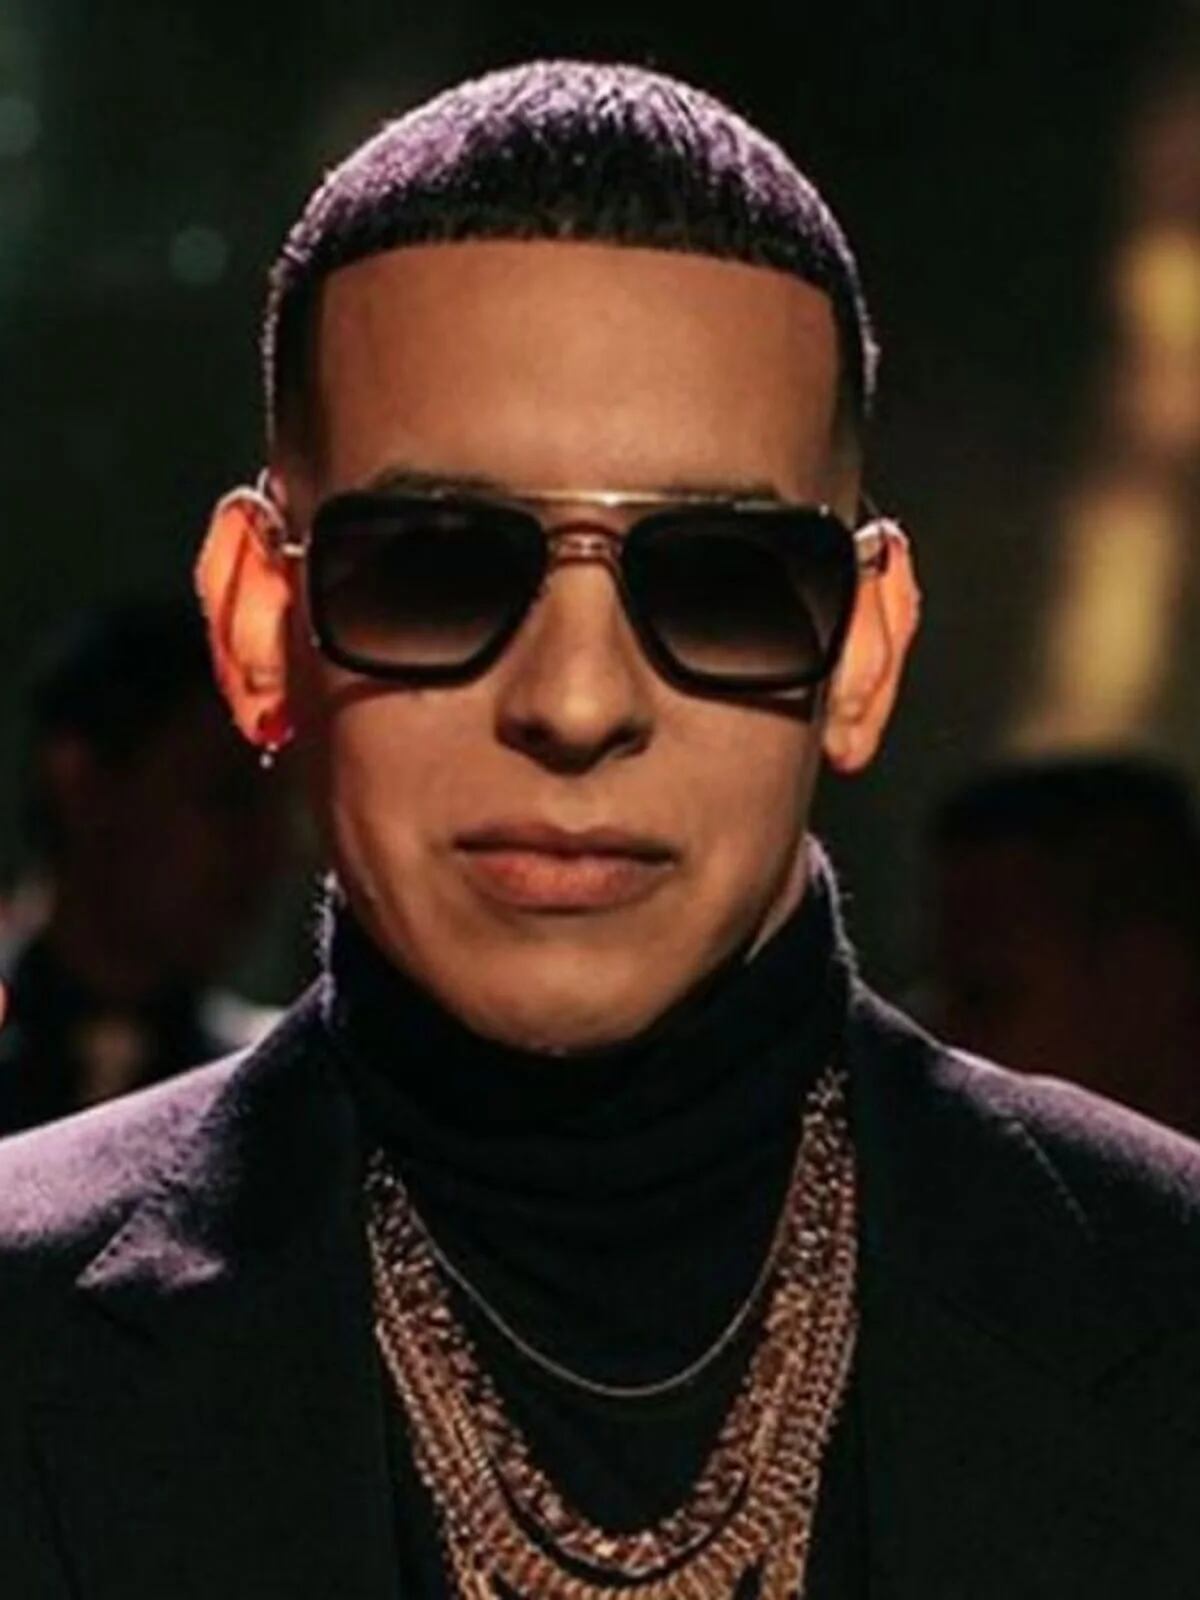 Daddy Yankee announced three new dates in Mexico for his last tour - Infobae